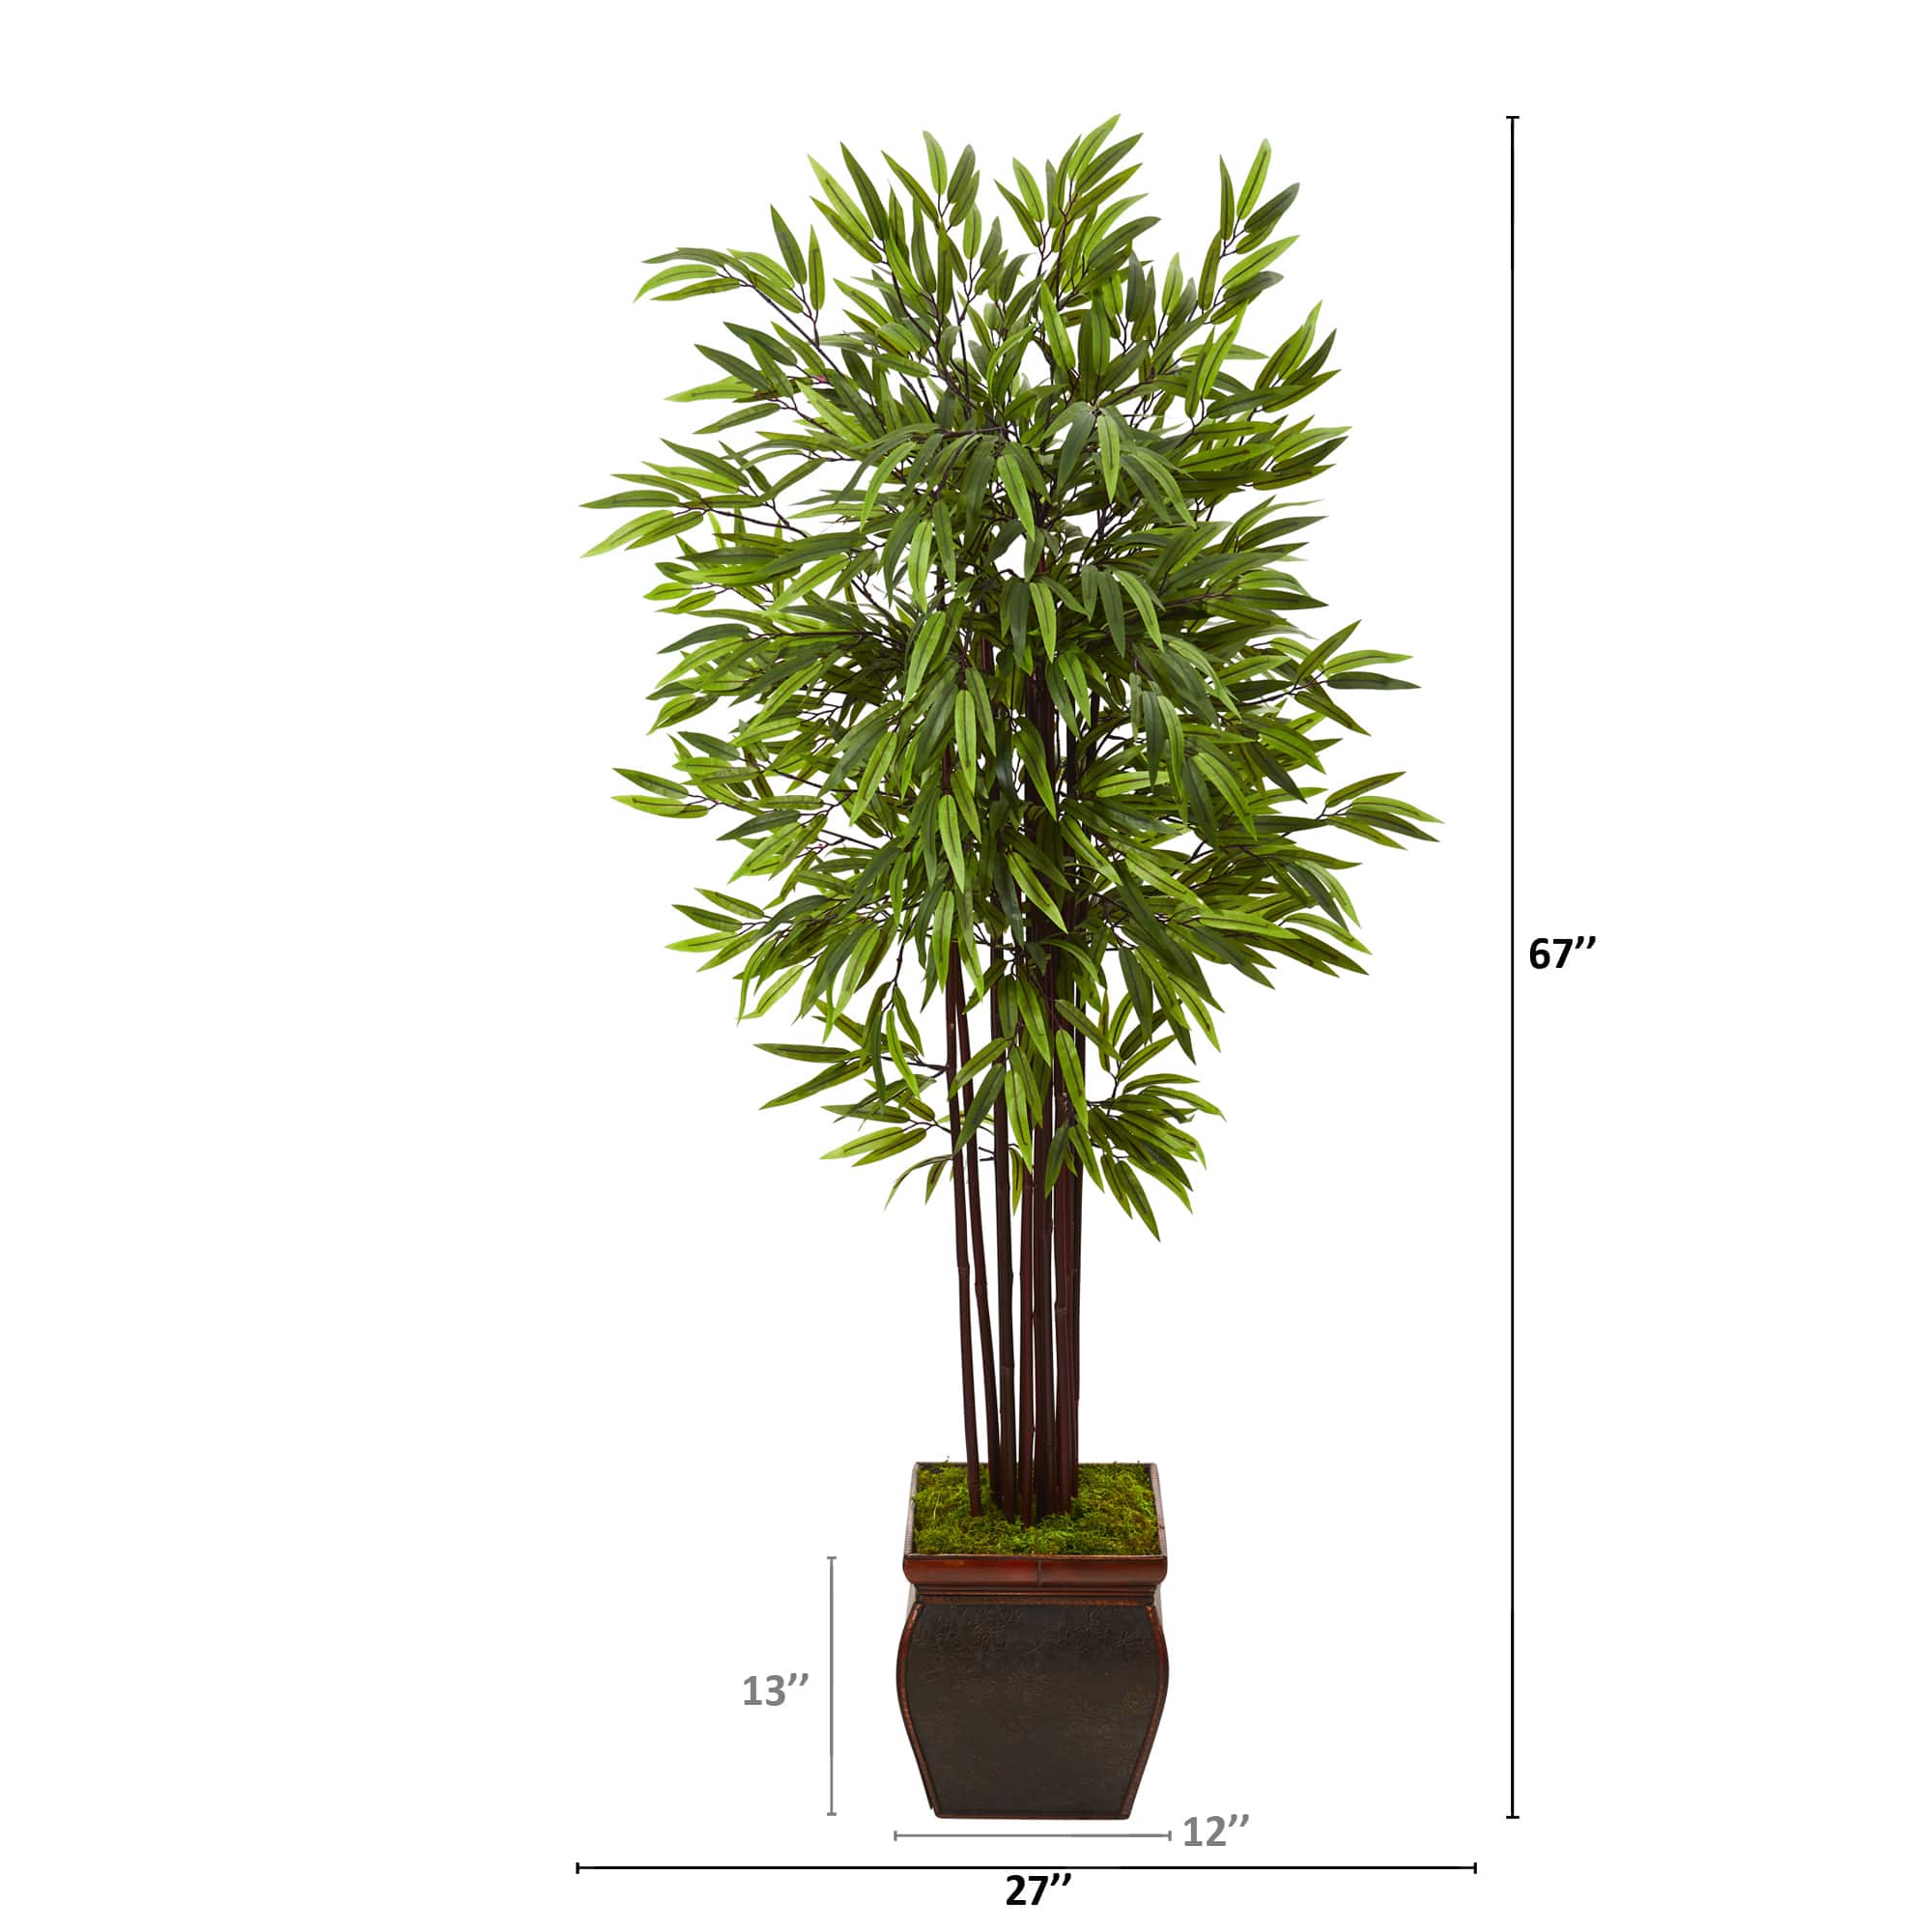 5.5ft. Bamboo Tree in Decorative Planter